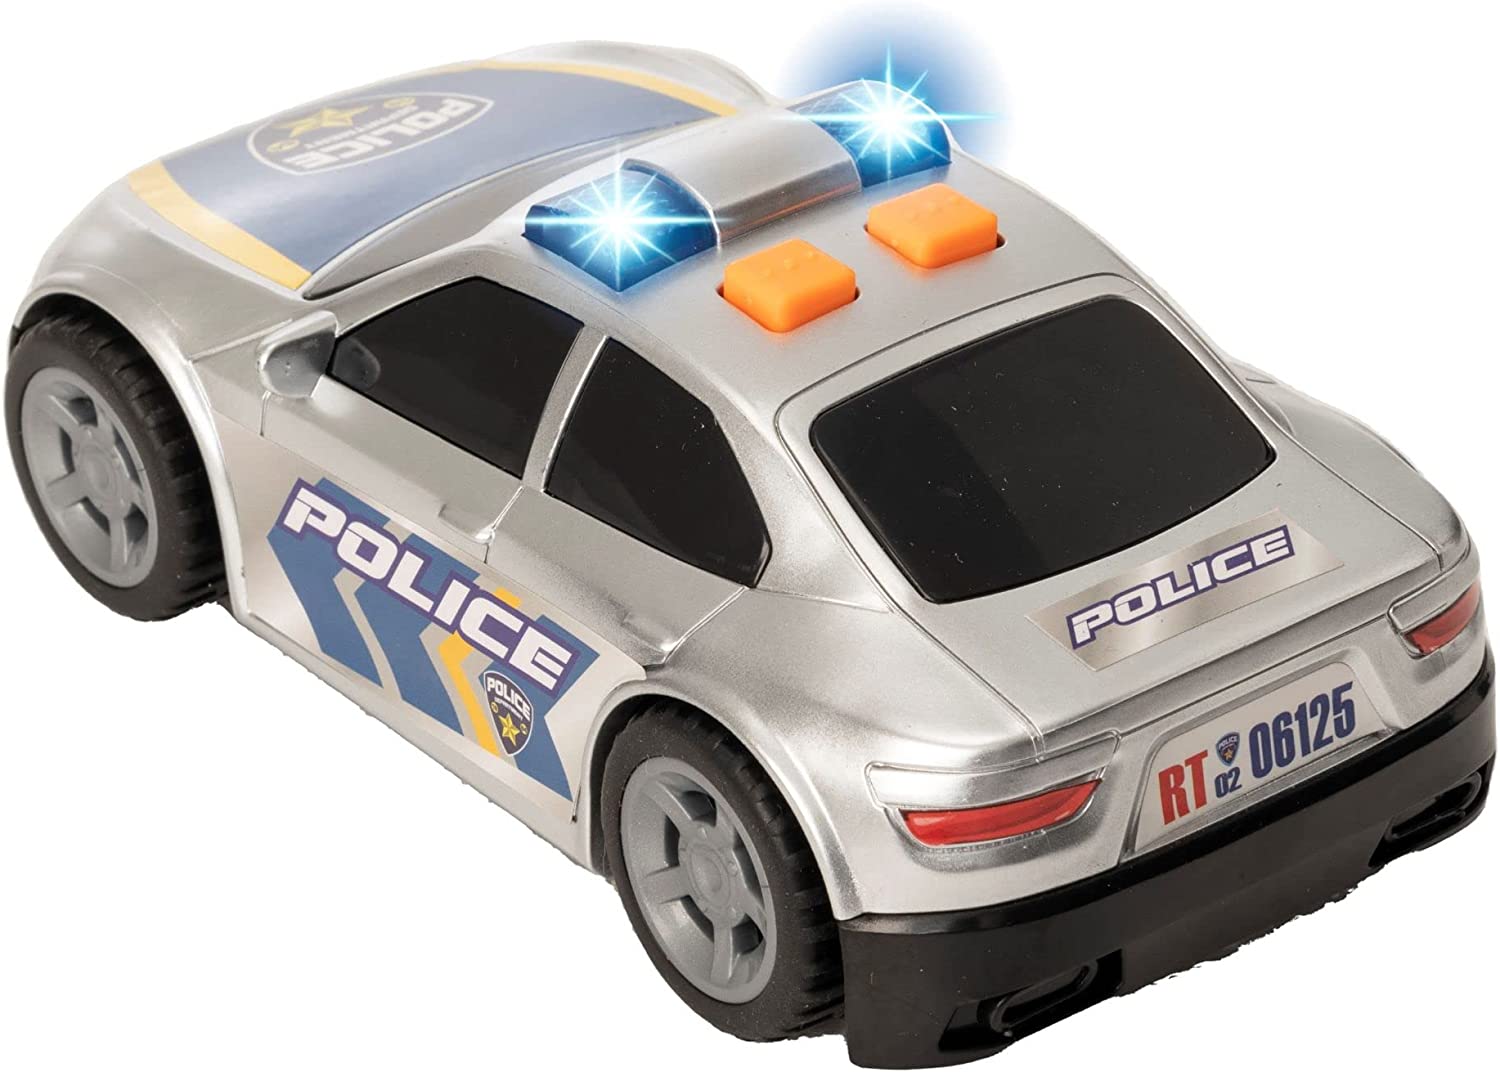 Teamsterz Police Car Toy For Kids Light and Sound Toys Gift